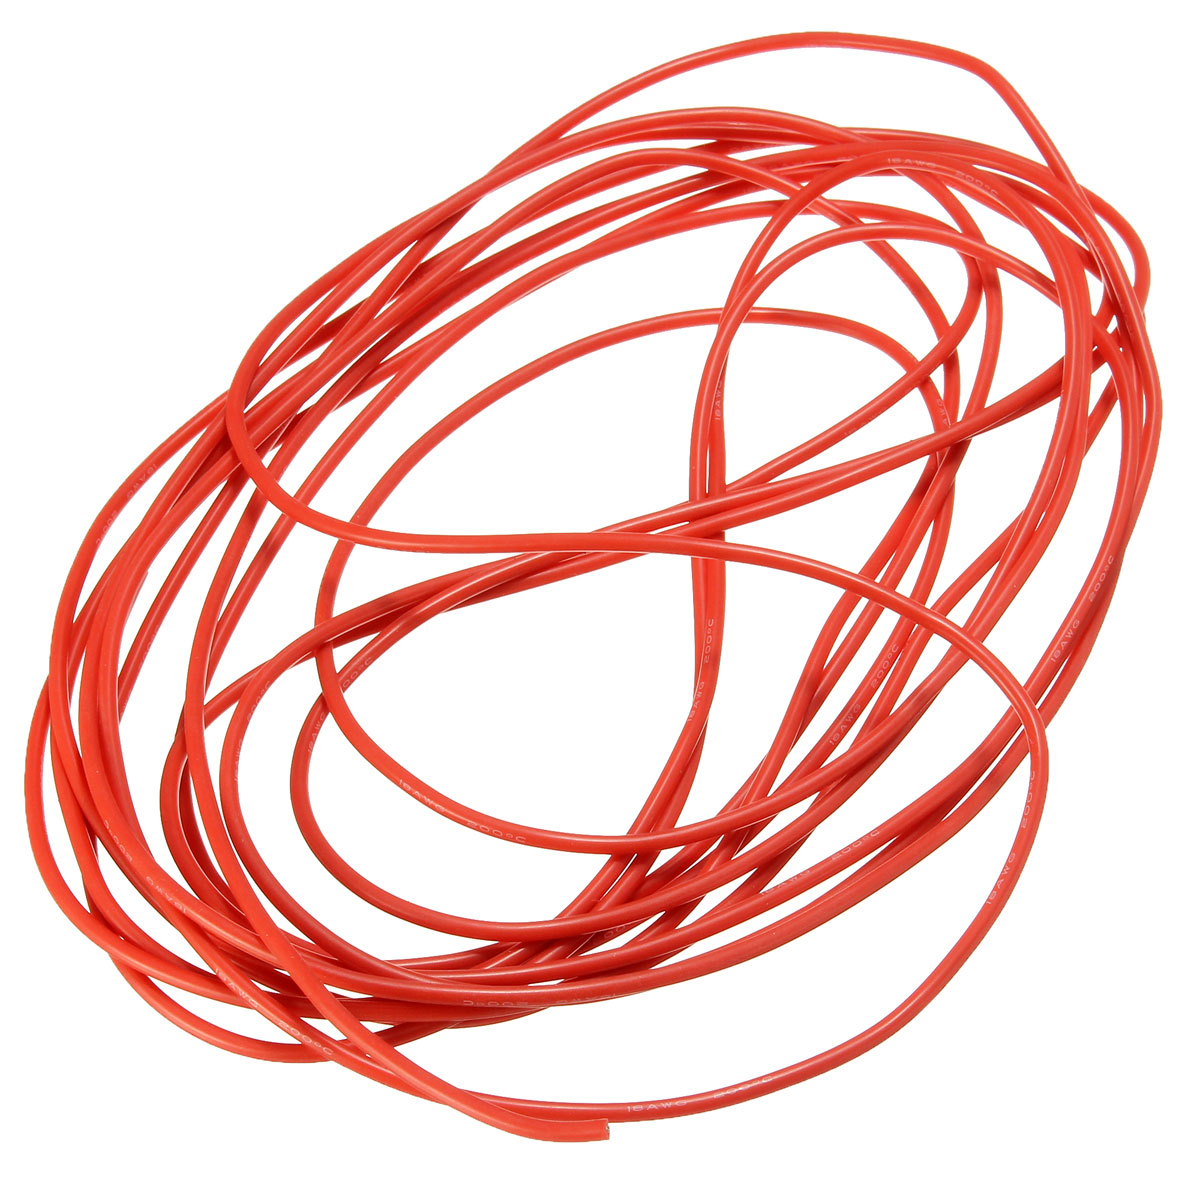 DANIU-5-Meter-Red-Silicone-Wire-Cable-10121416182022AWG-Flexible-Cable-1170292-2